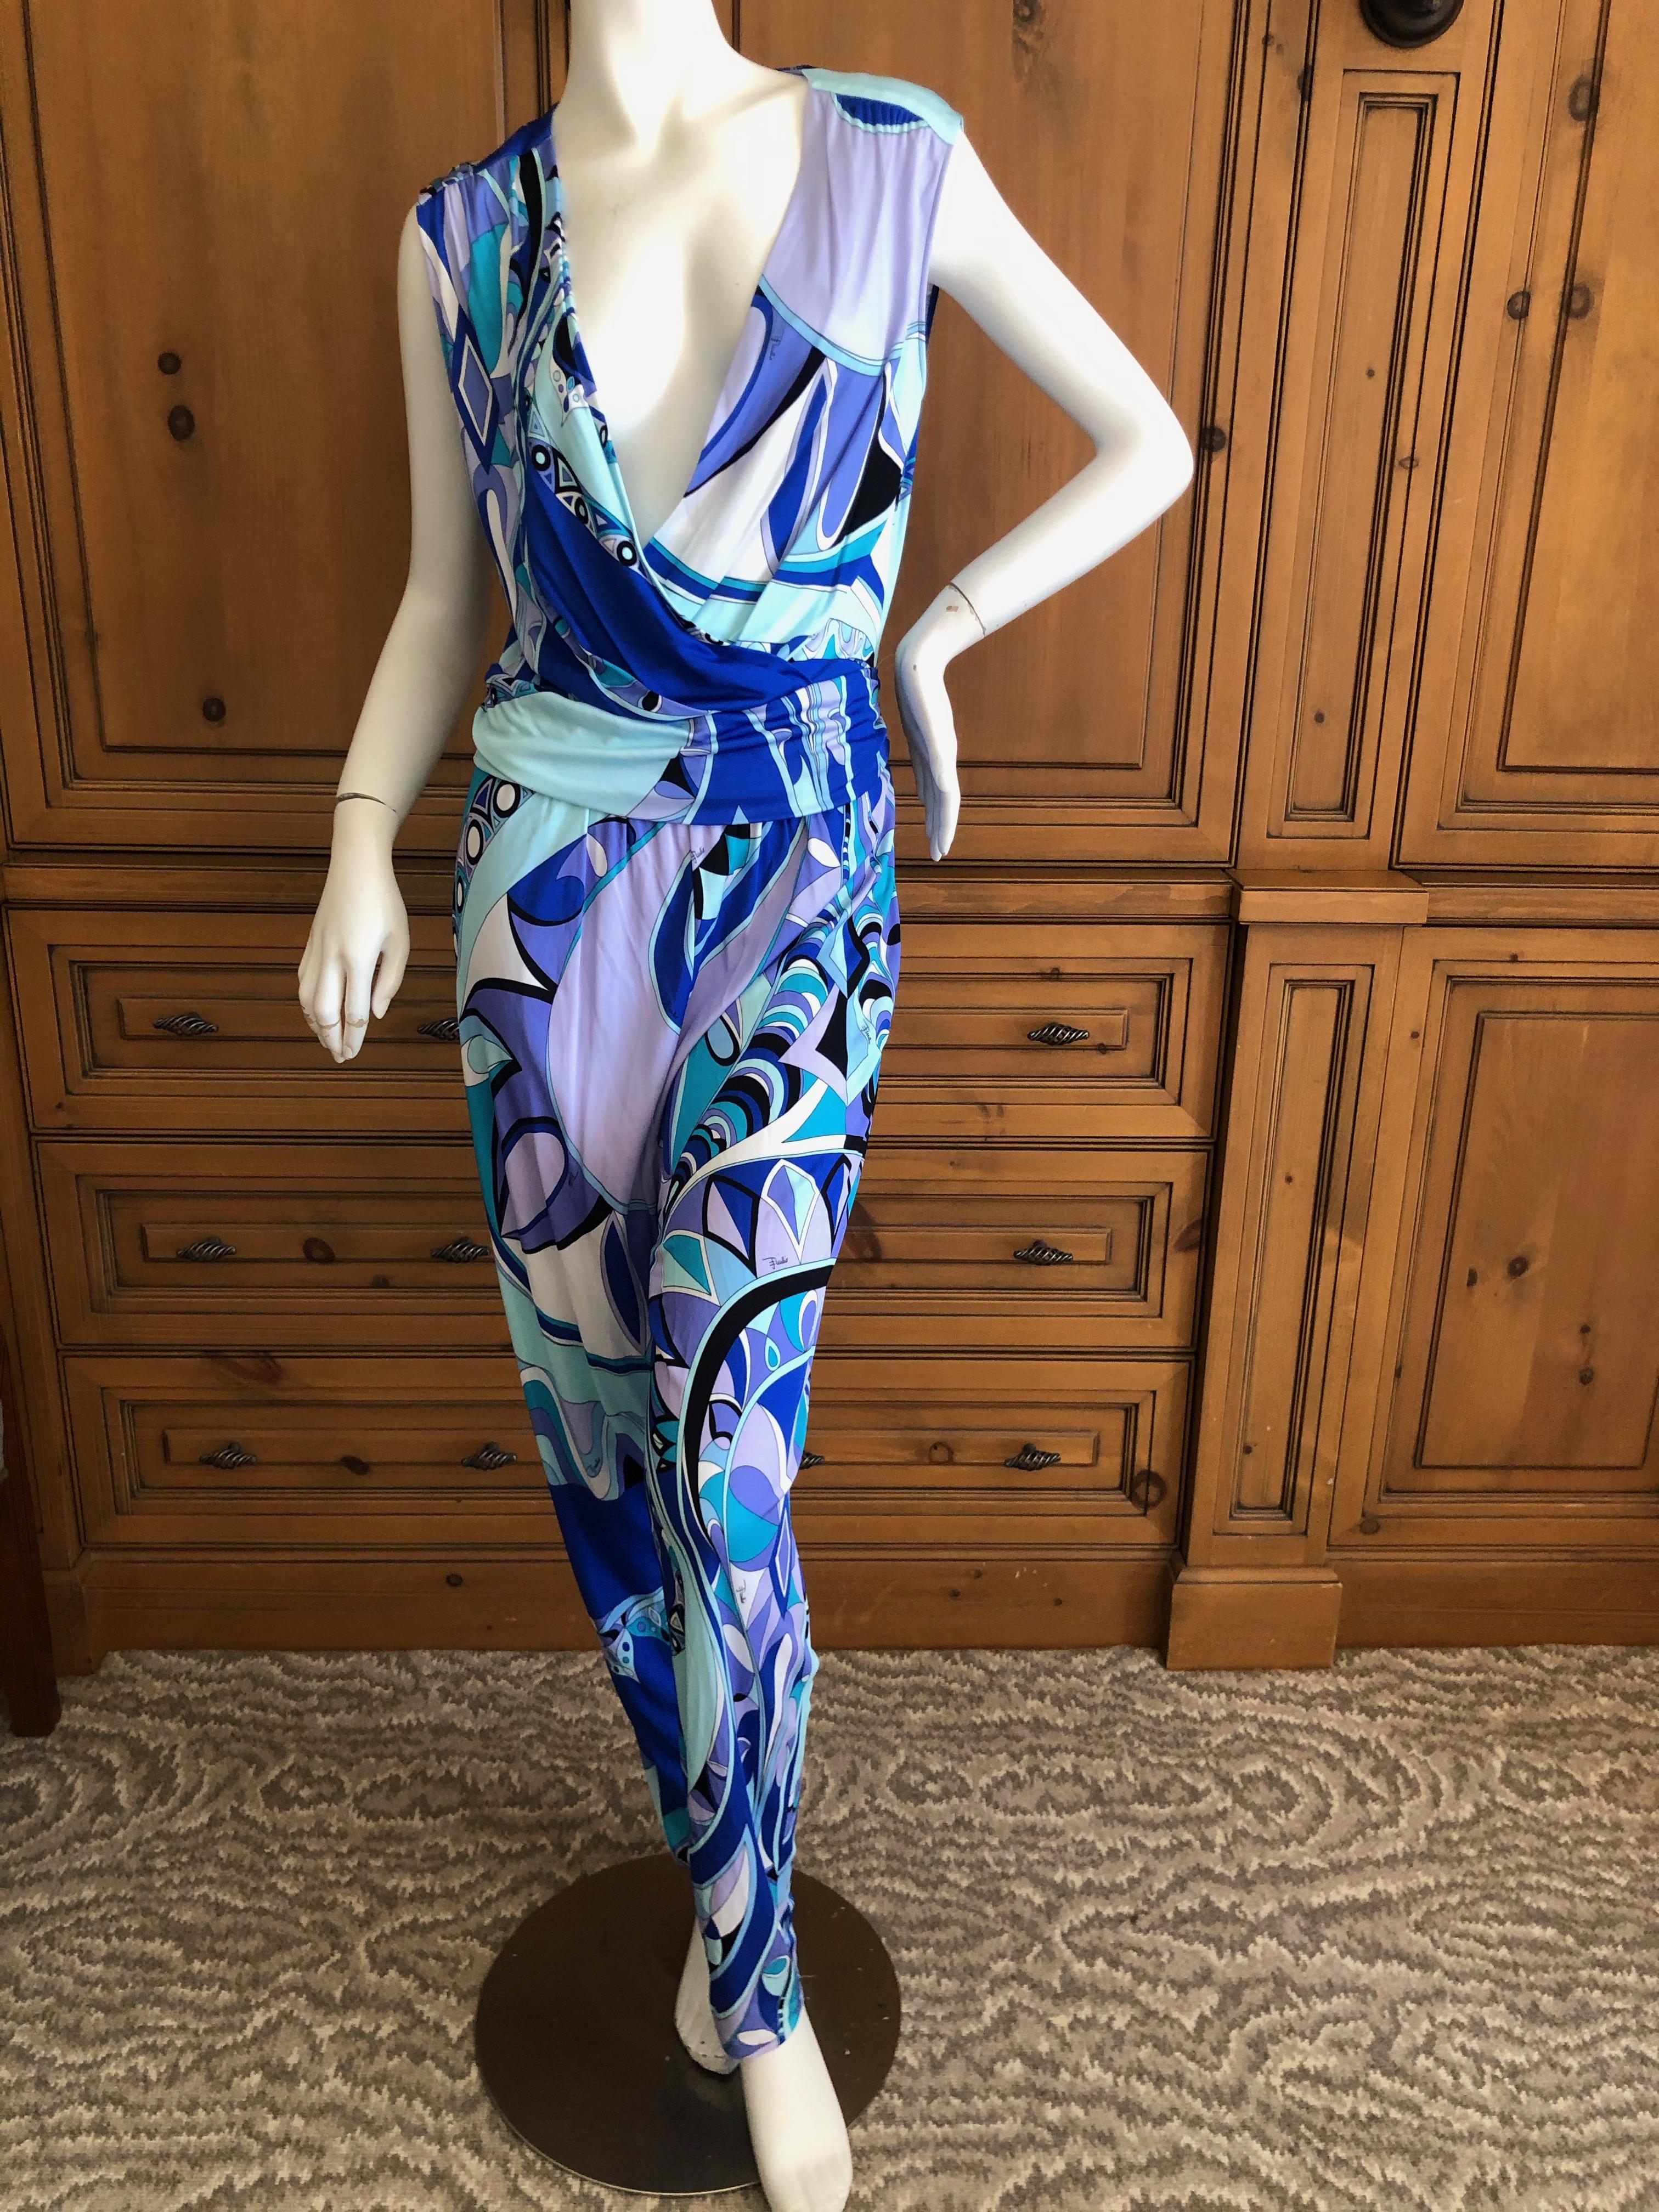 Emilio Pucci Colorful Low Cut Jumpsuit
This is so much prettier in person.
Size 42
Bust 40